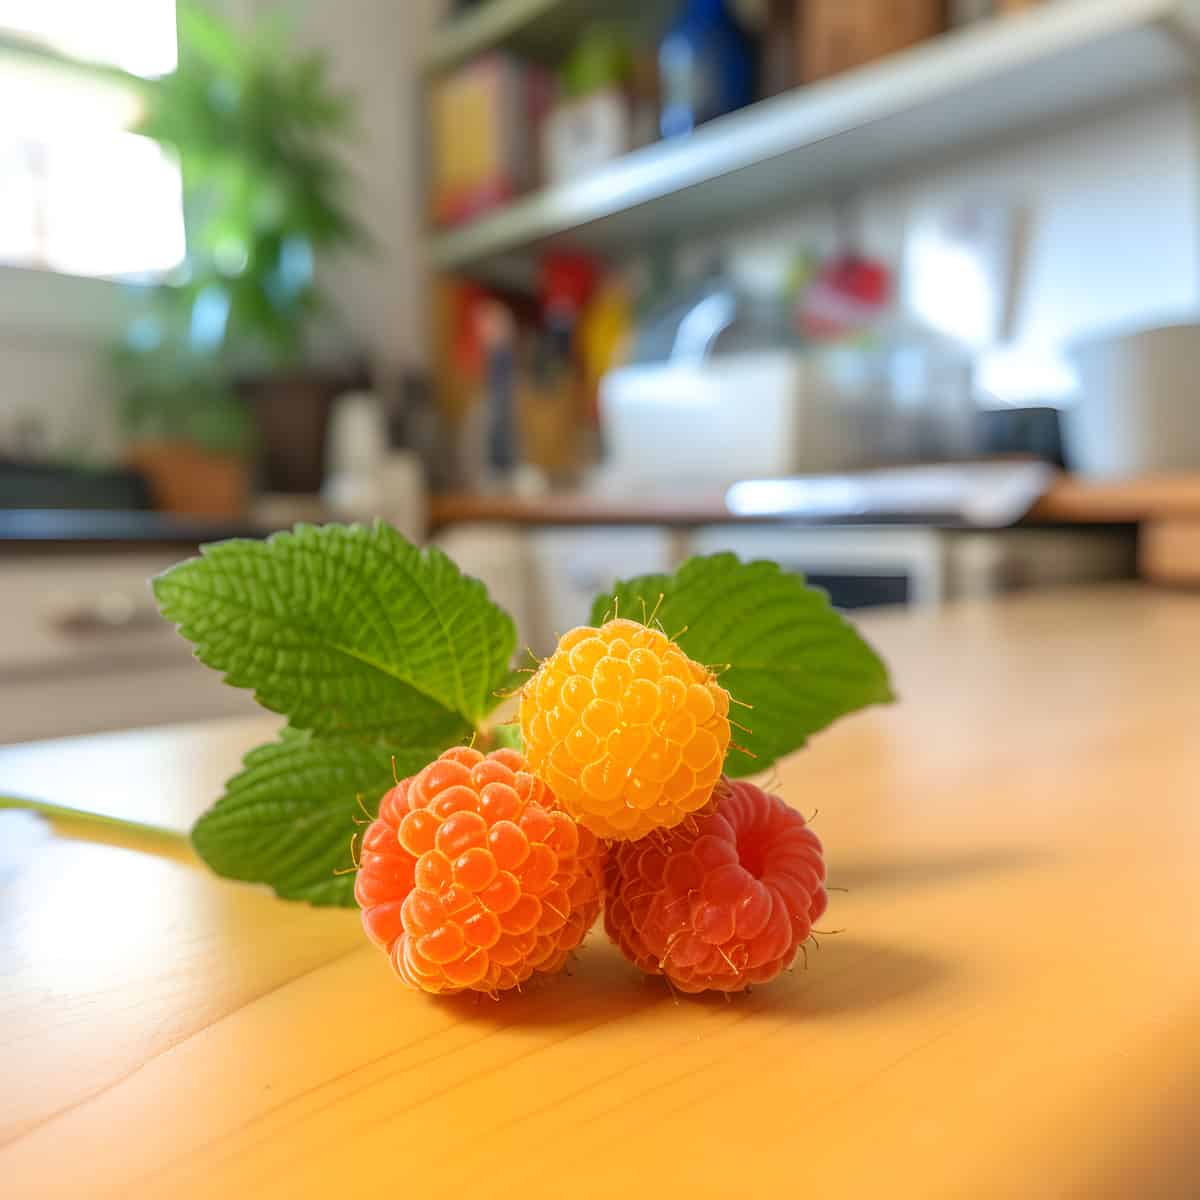 Creeping Raspberry on a kitchen counter